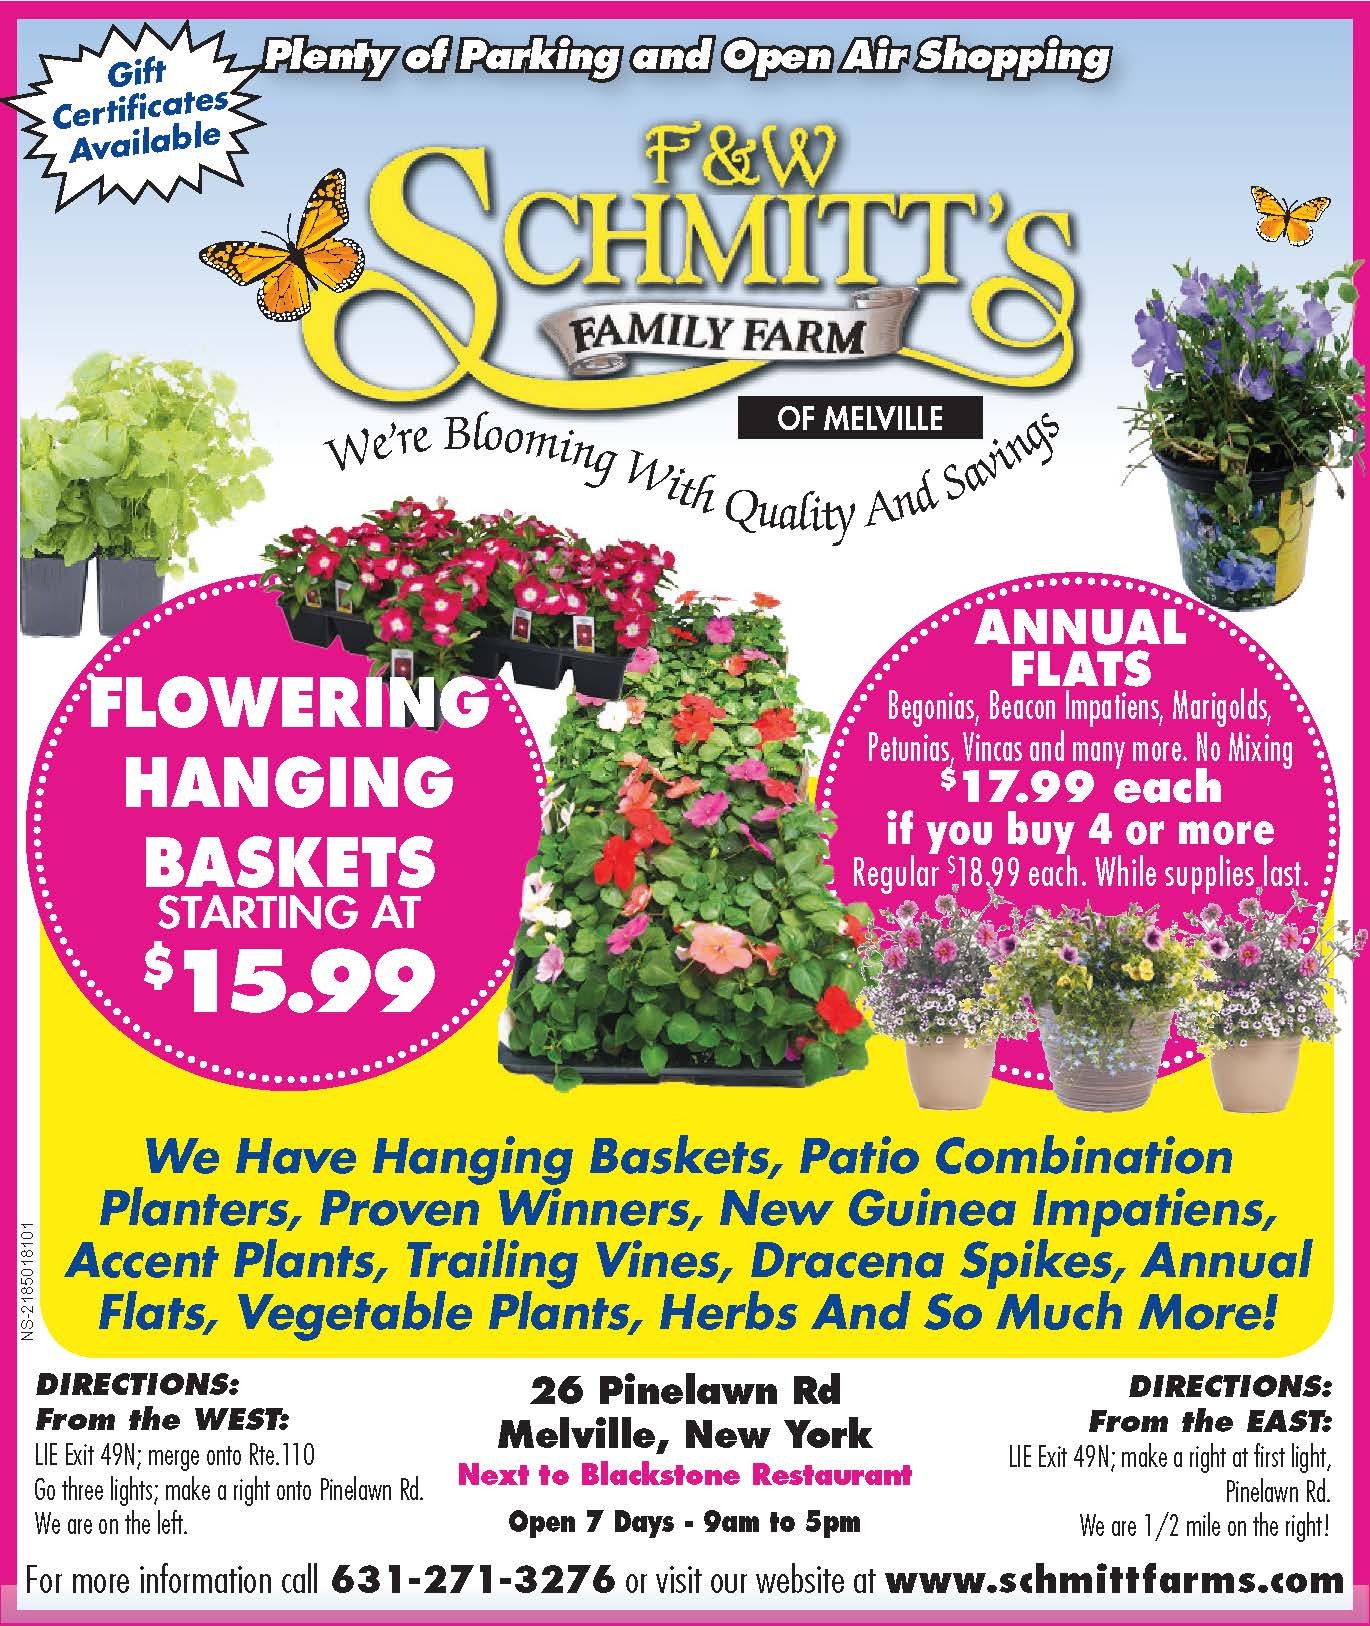 Schmitt's Family Farm located in Melville, NY announces the opening of the farm for the spring season and highlights their offerings such as flowering hanging baskets, annual flats, and much more. The ad also mentions gift certificates availability, open-air shopping, and provides directions to the farm along with their contact information and website.